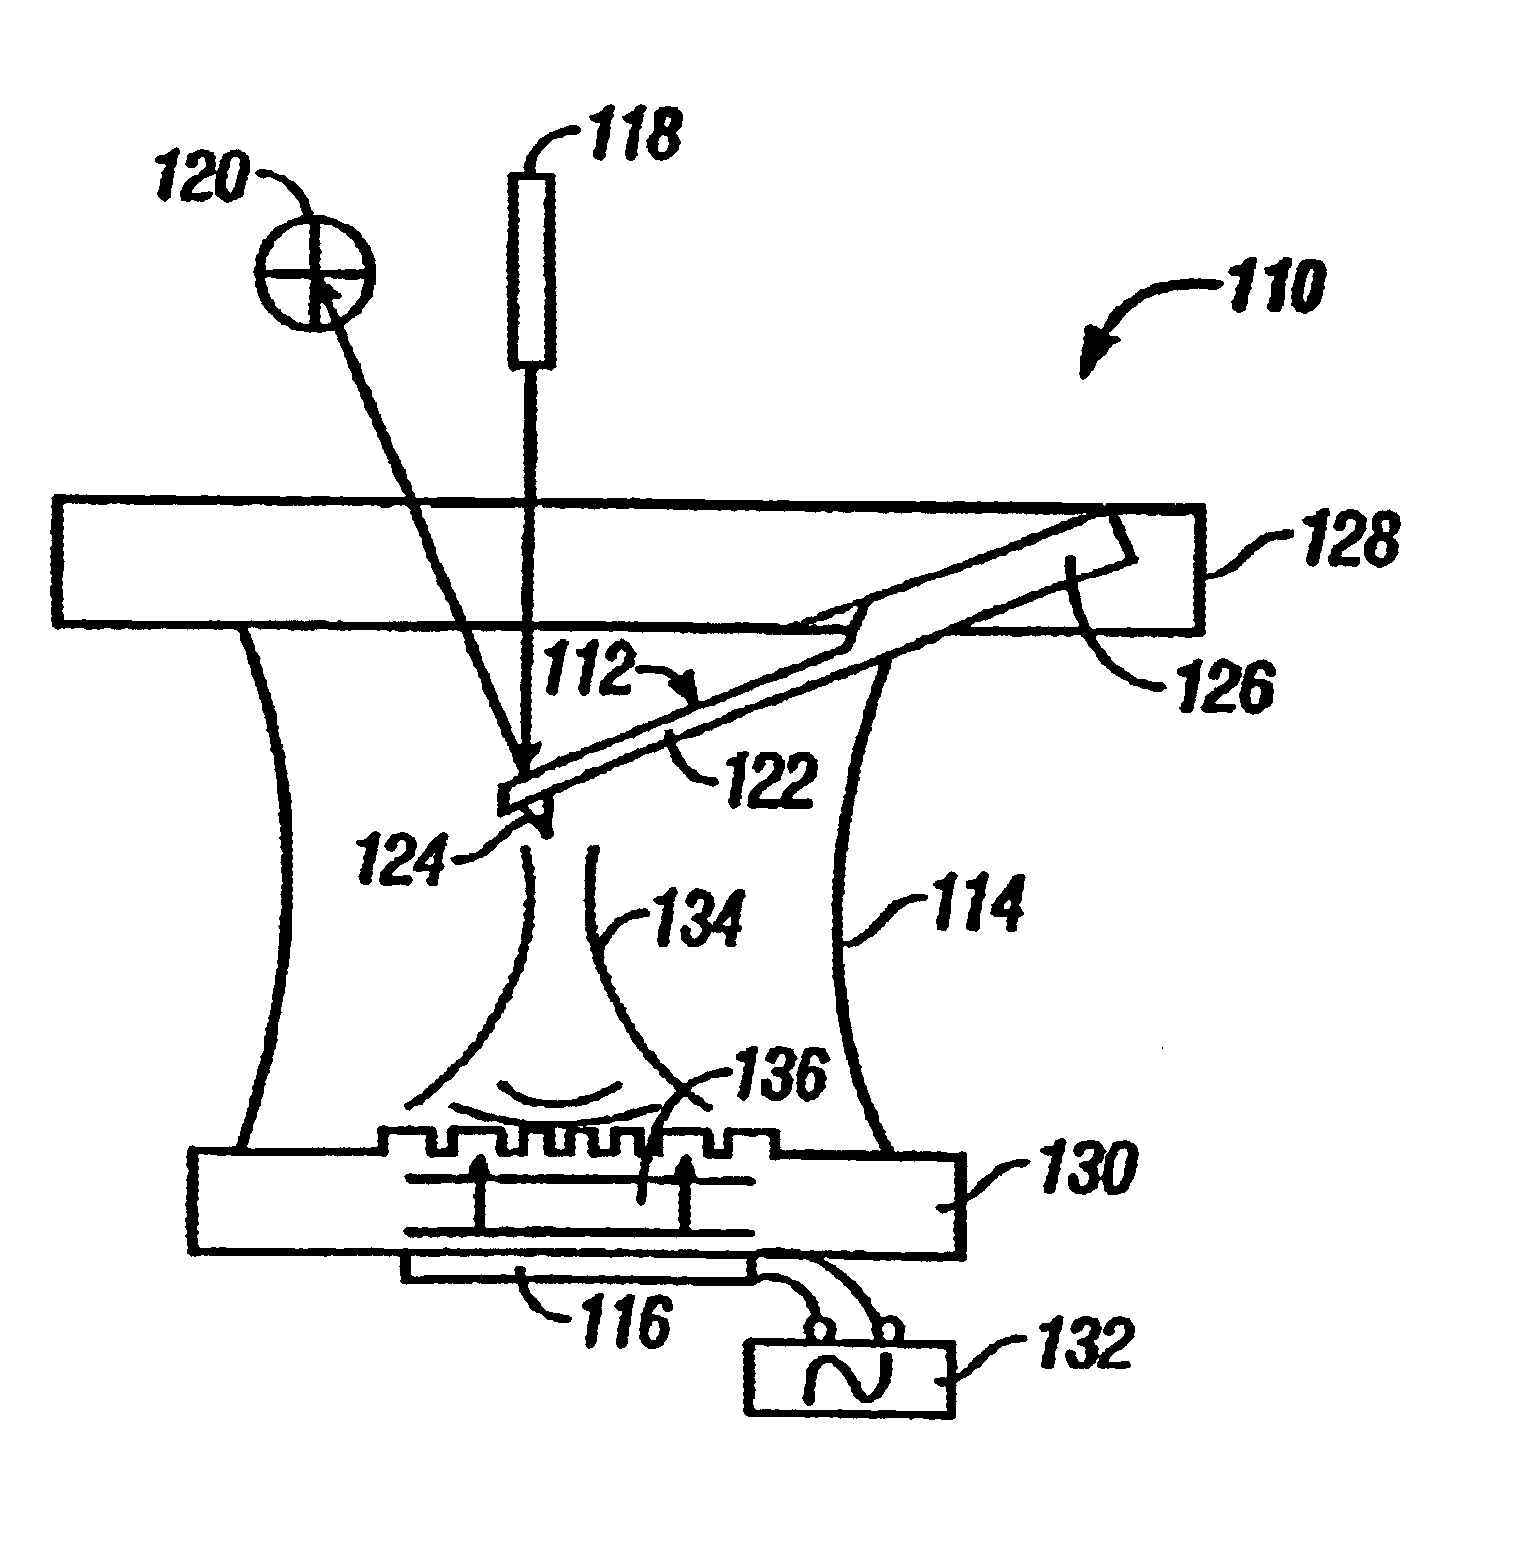 Method and apparatus for the ultrasonic actuation of the cantilever of a probe-based instrument